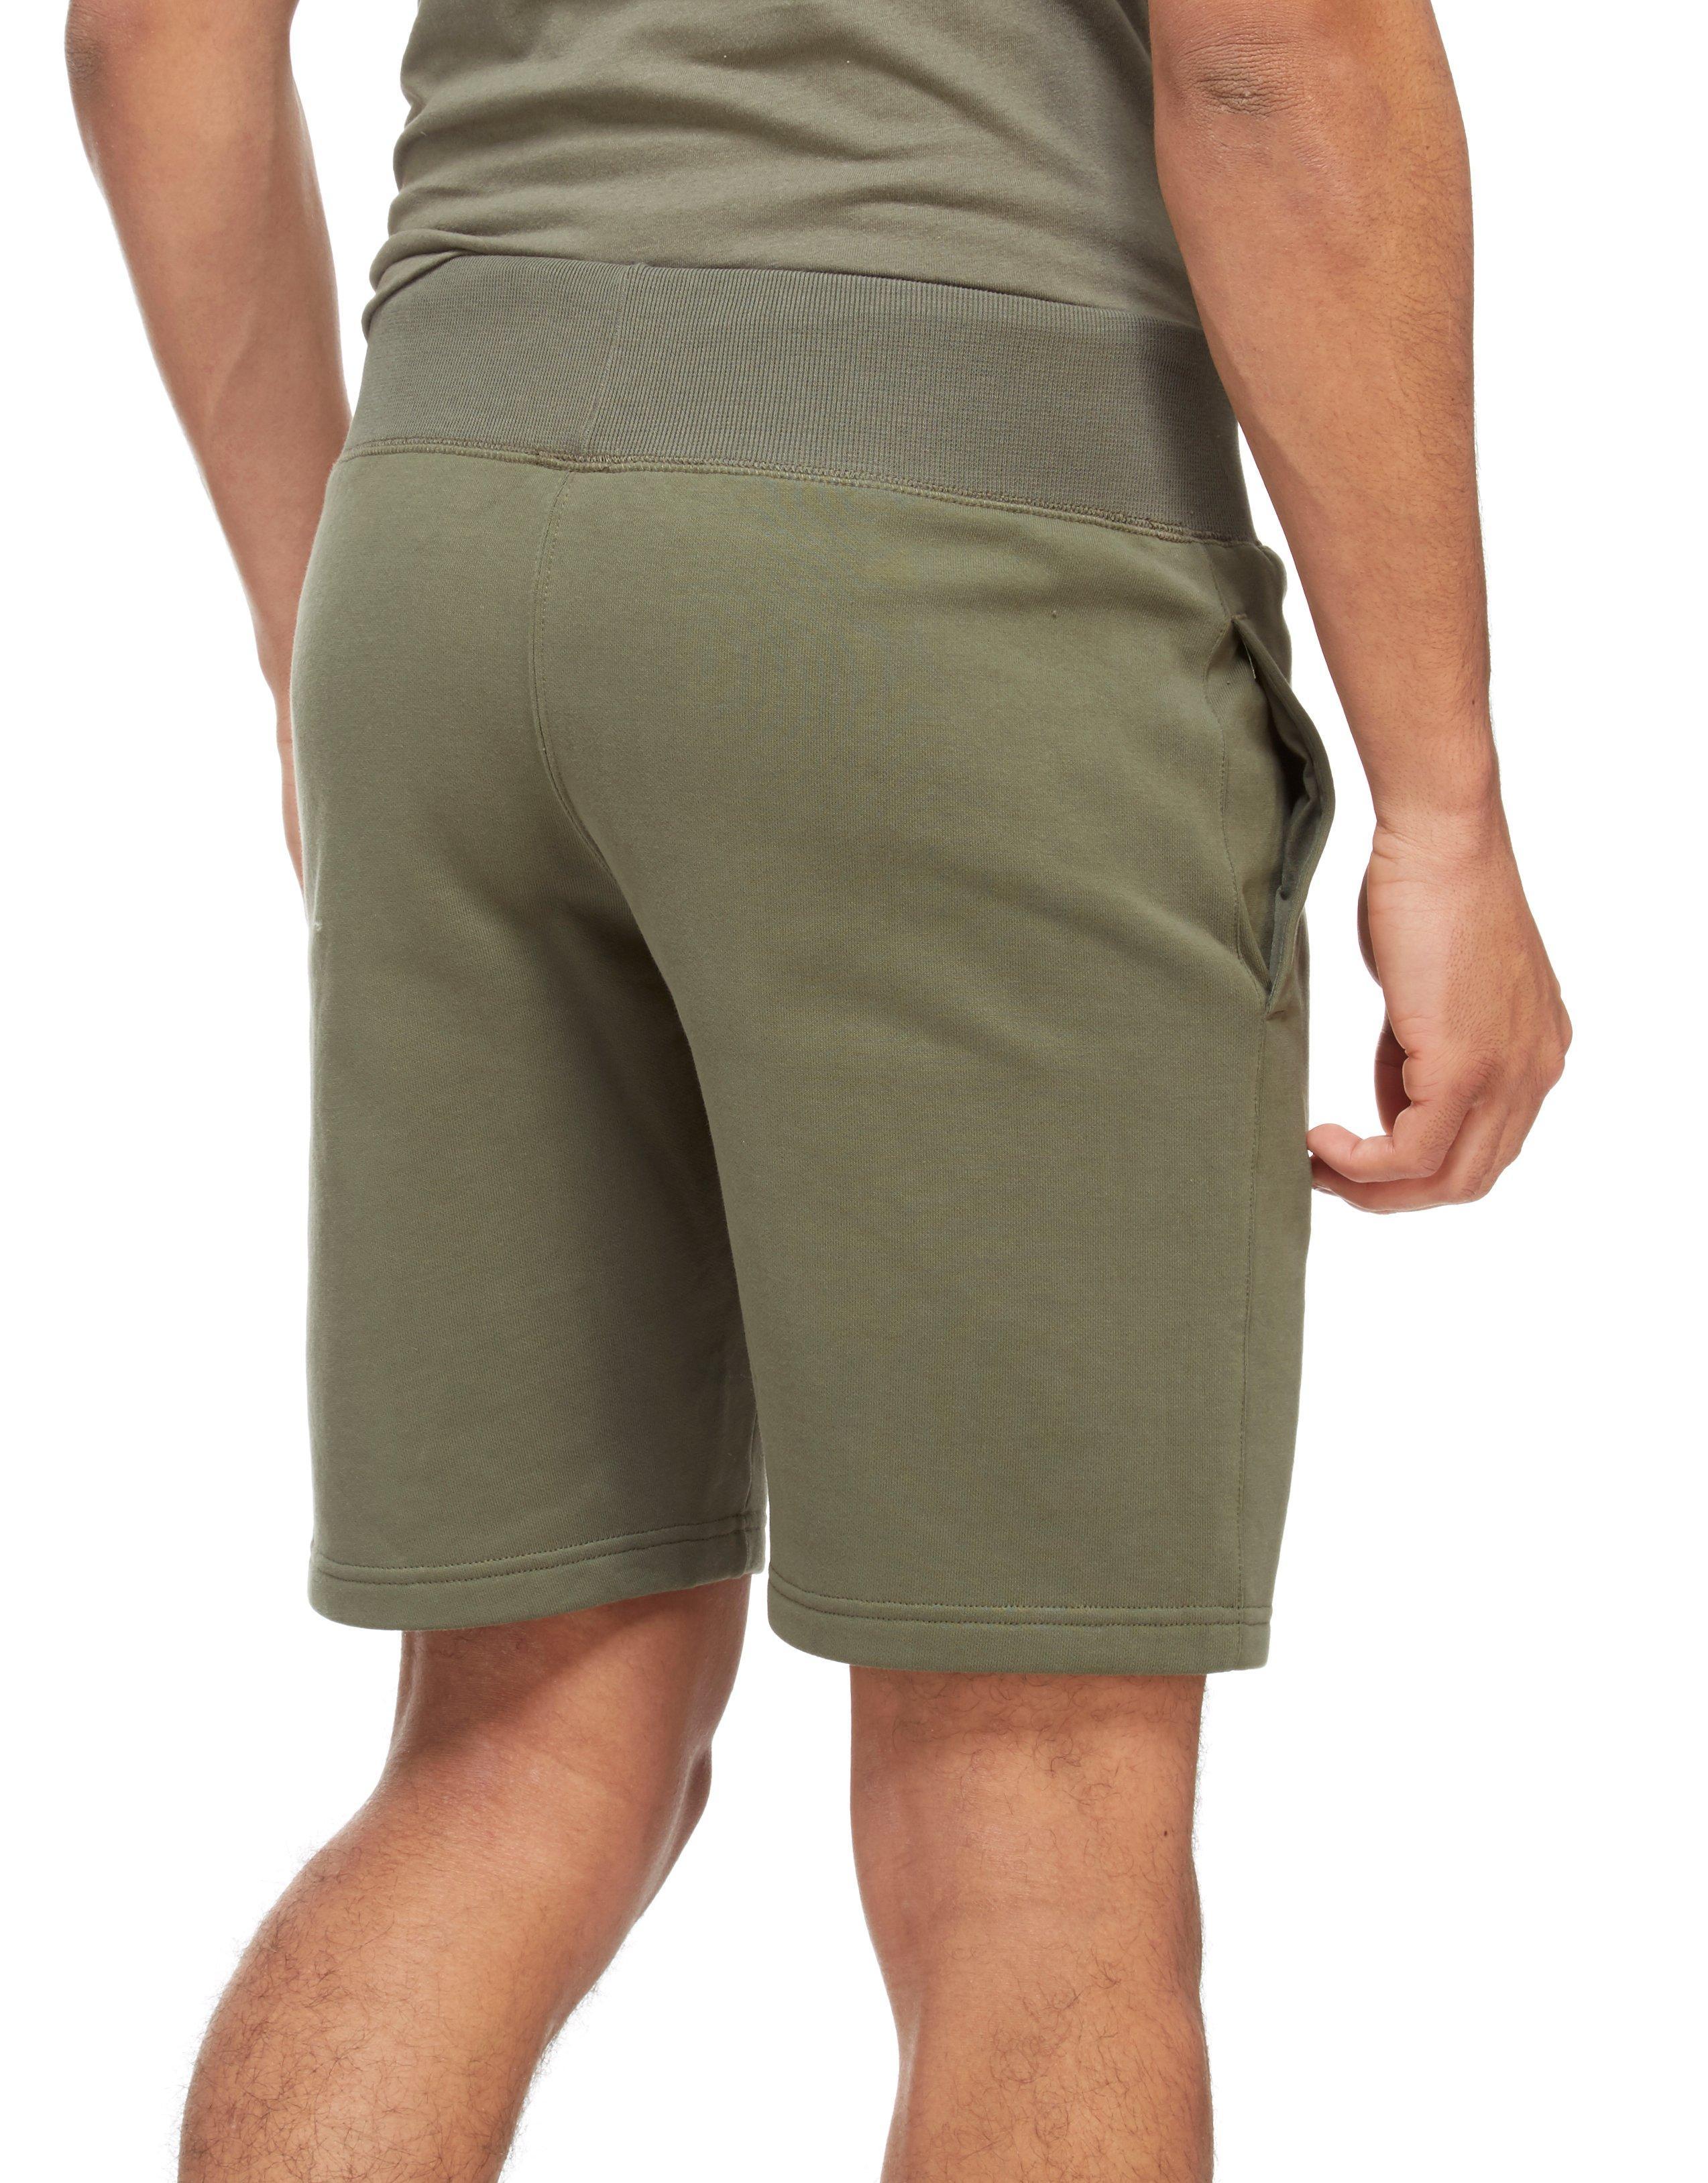 Lyst - Champion Core Shorts in Green for Men